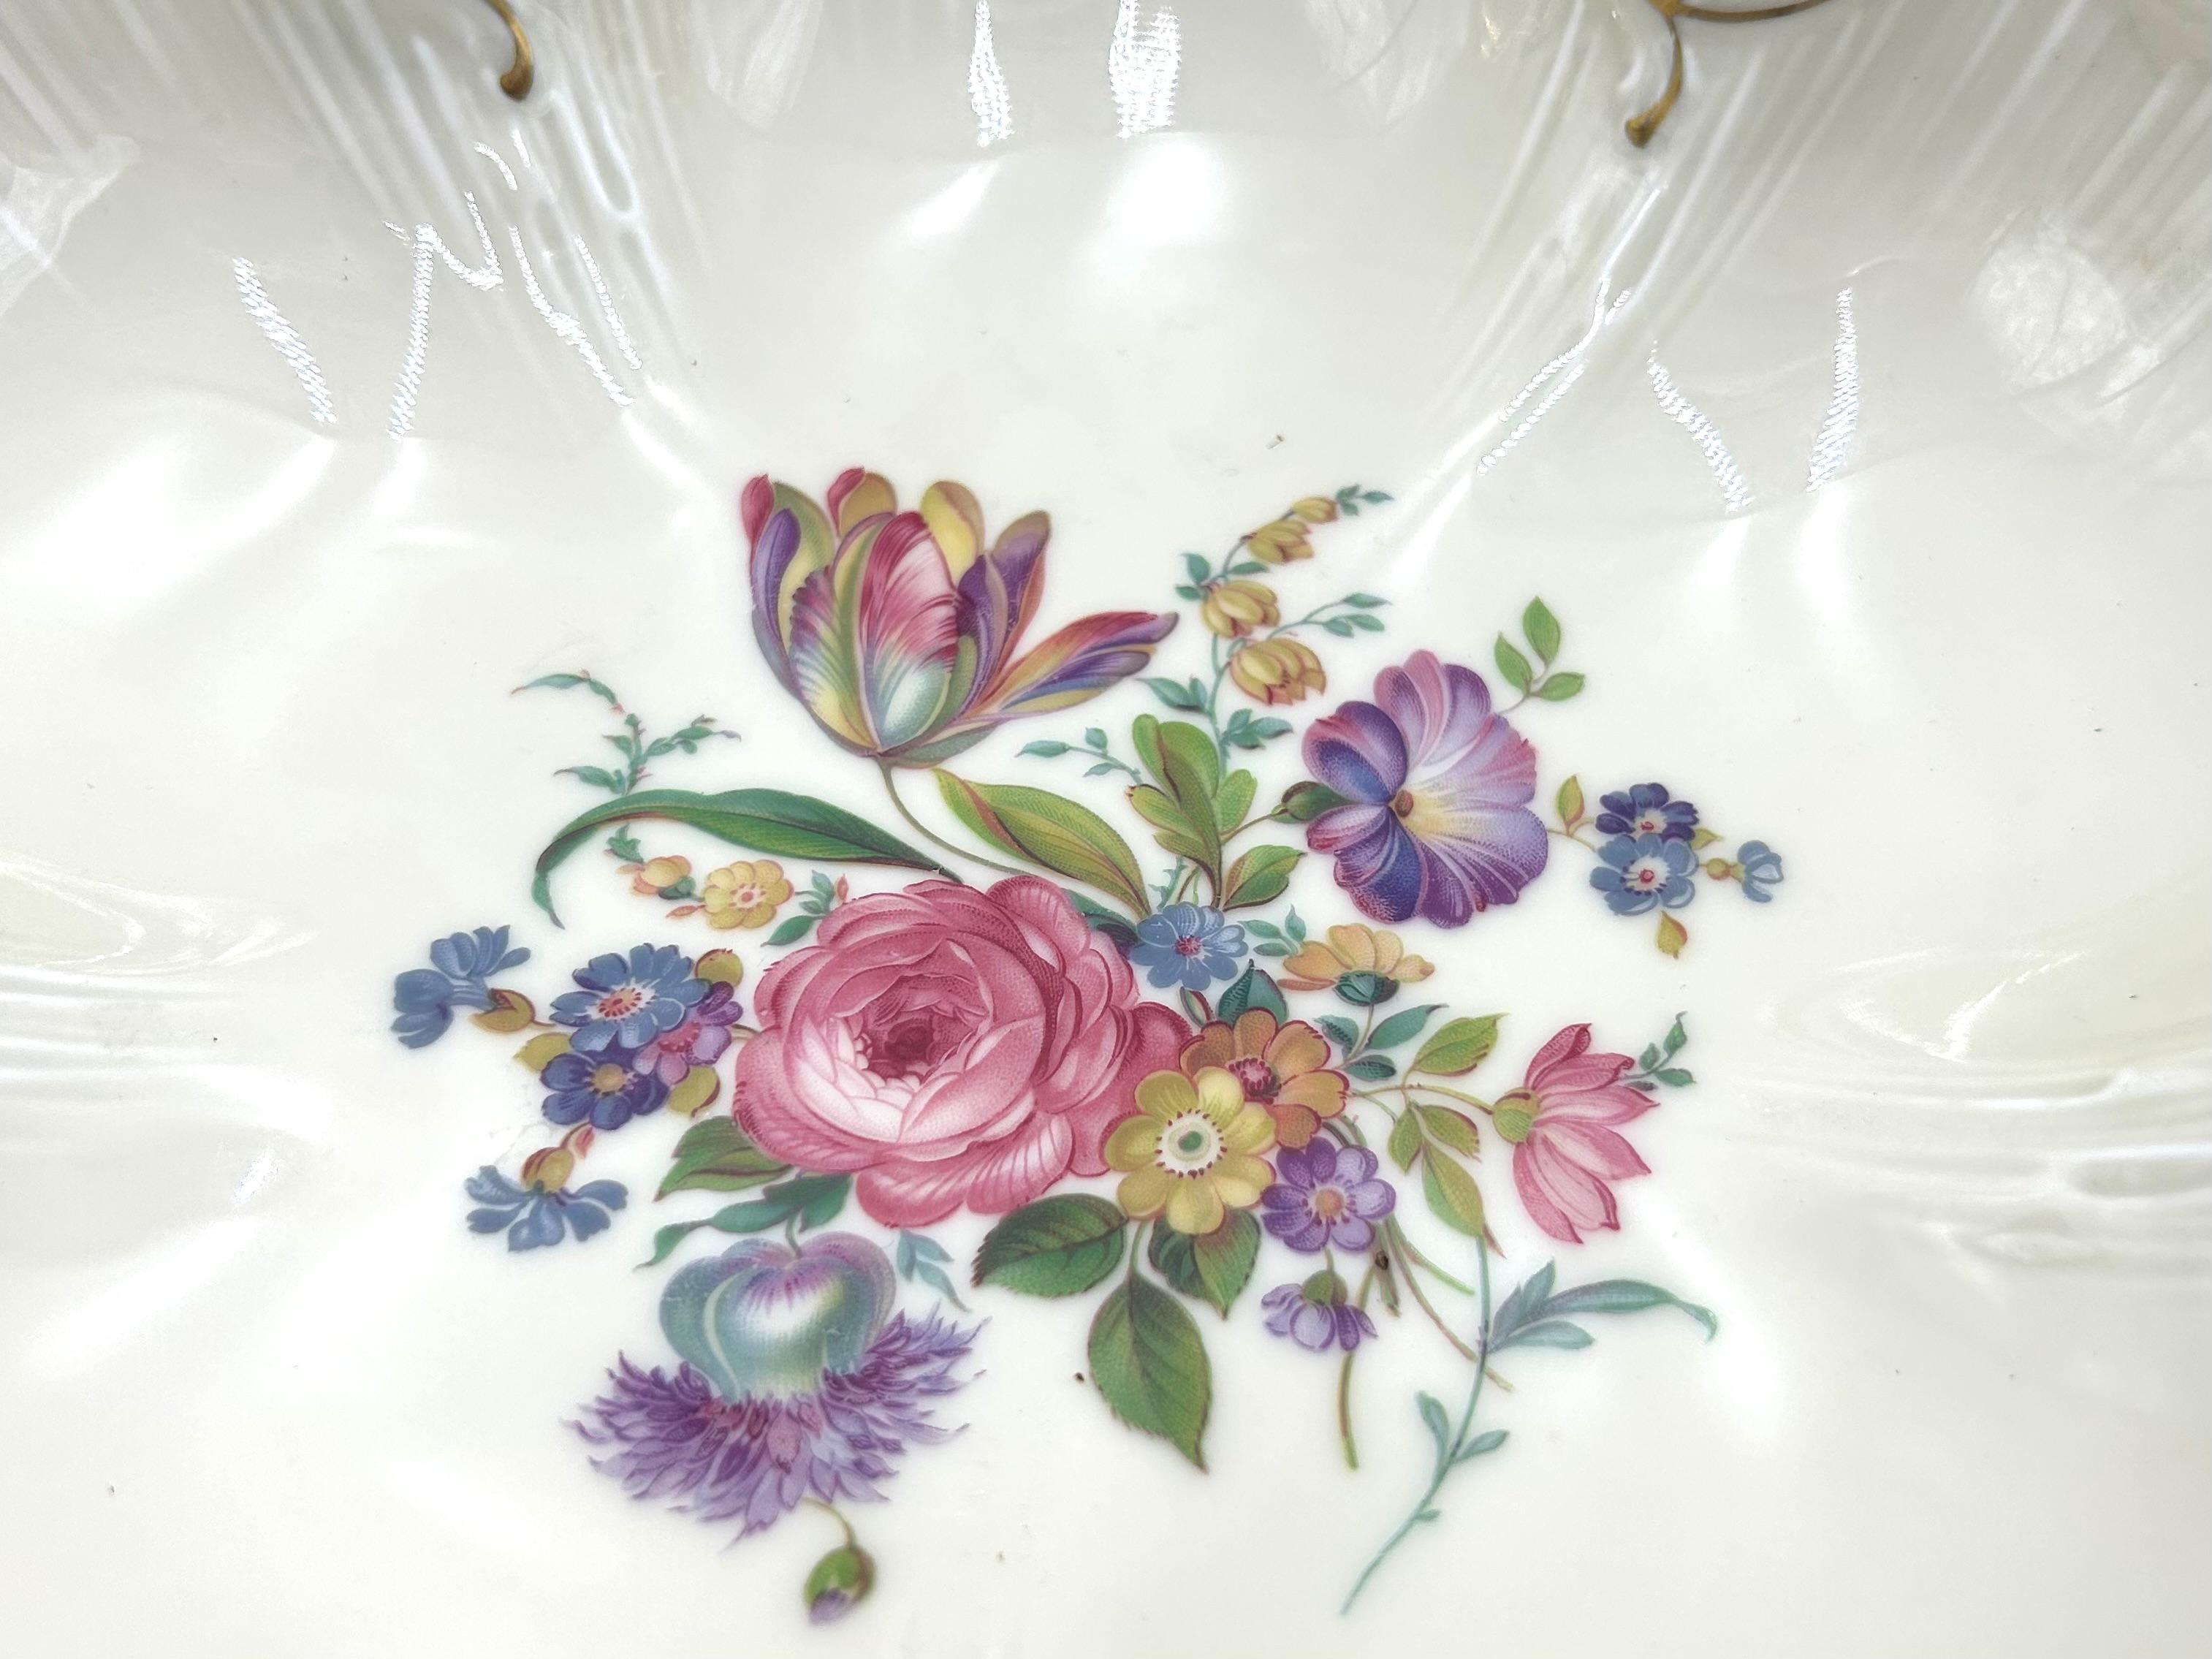 Porcelain Bowl, Rosenthal Moliere, Germany, Mid-20th Century In Good Condition For Sale In Chorzów, PL